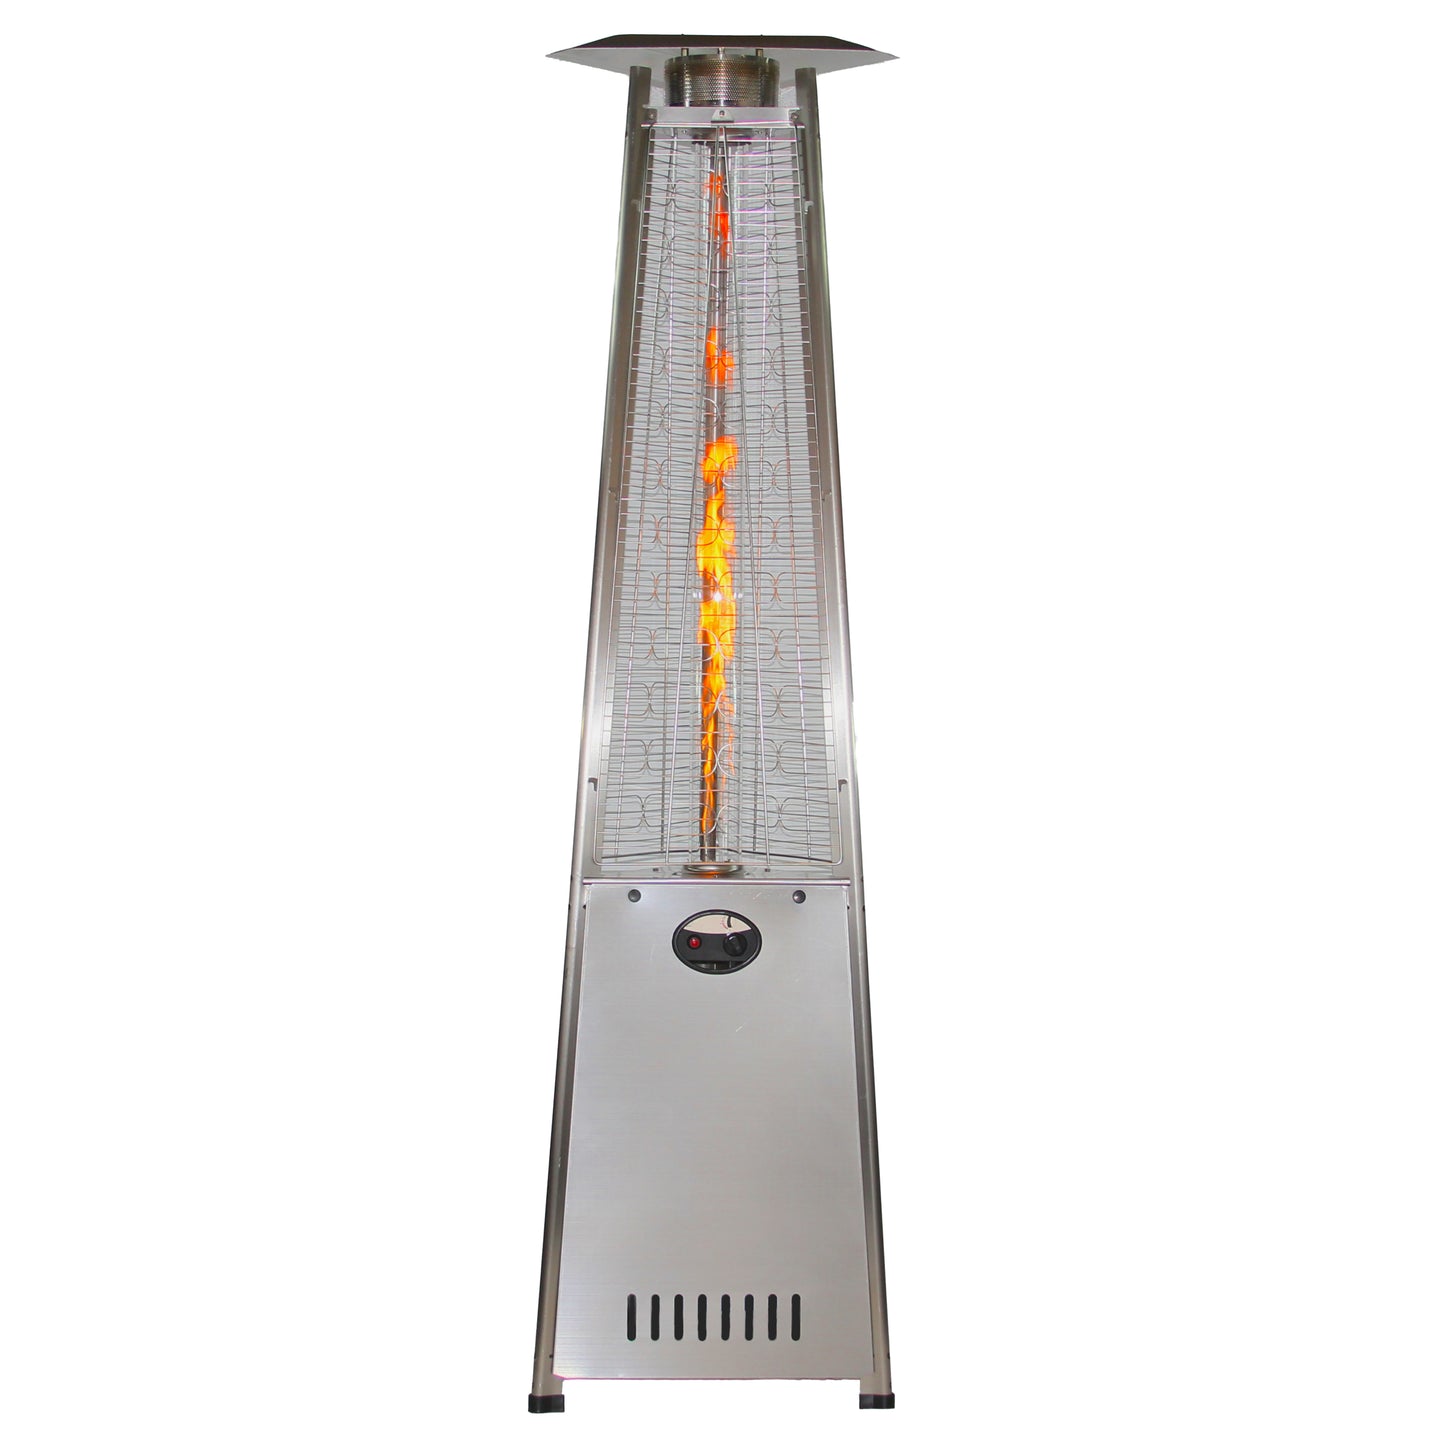 93" Pyramid Flame Propane Patio Heater - Stainless Steel Finish